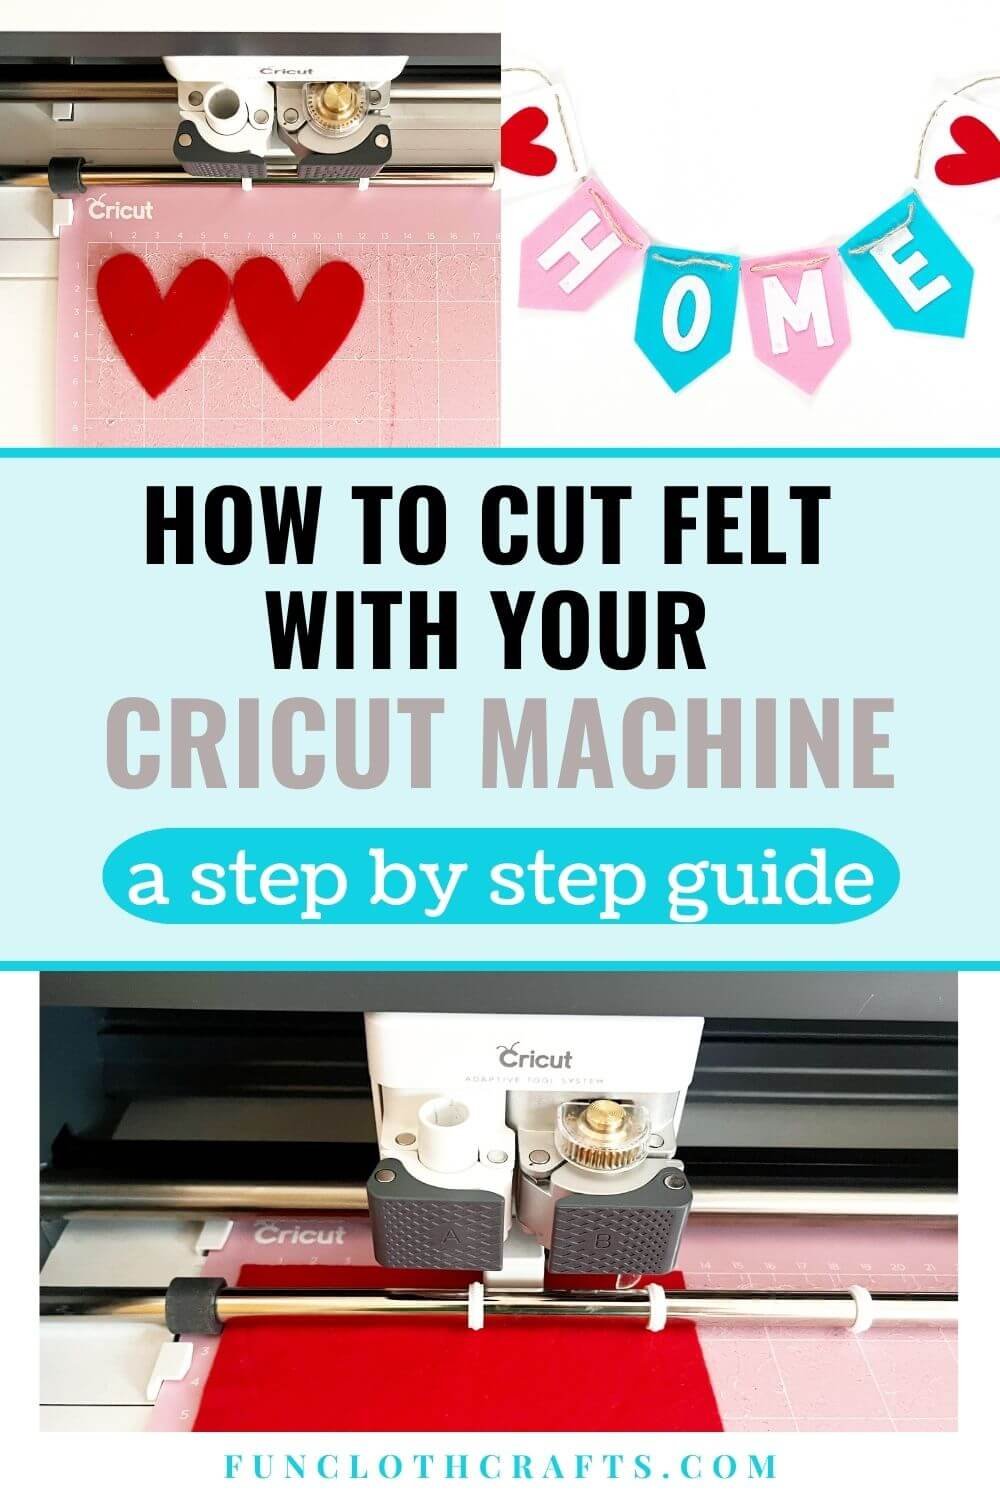 The Ultimate Guide of Cricut Terms (& What They Mean)